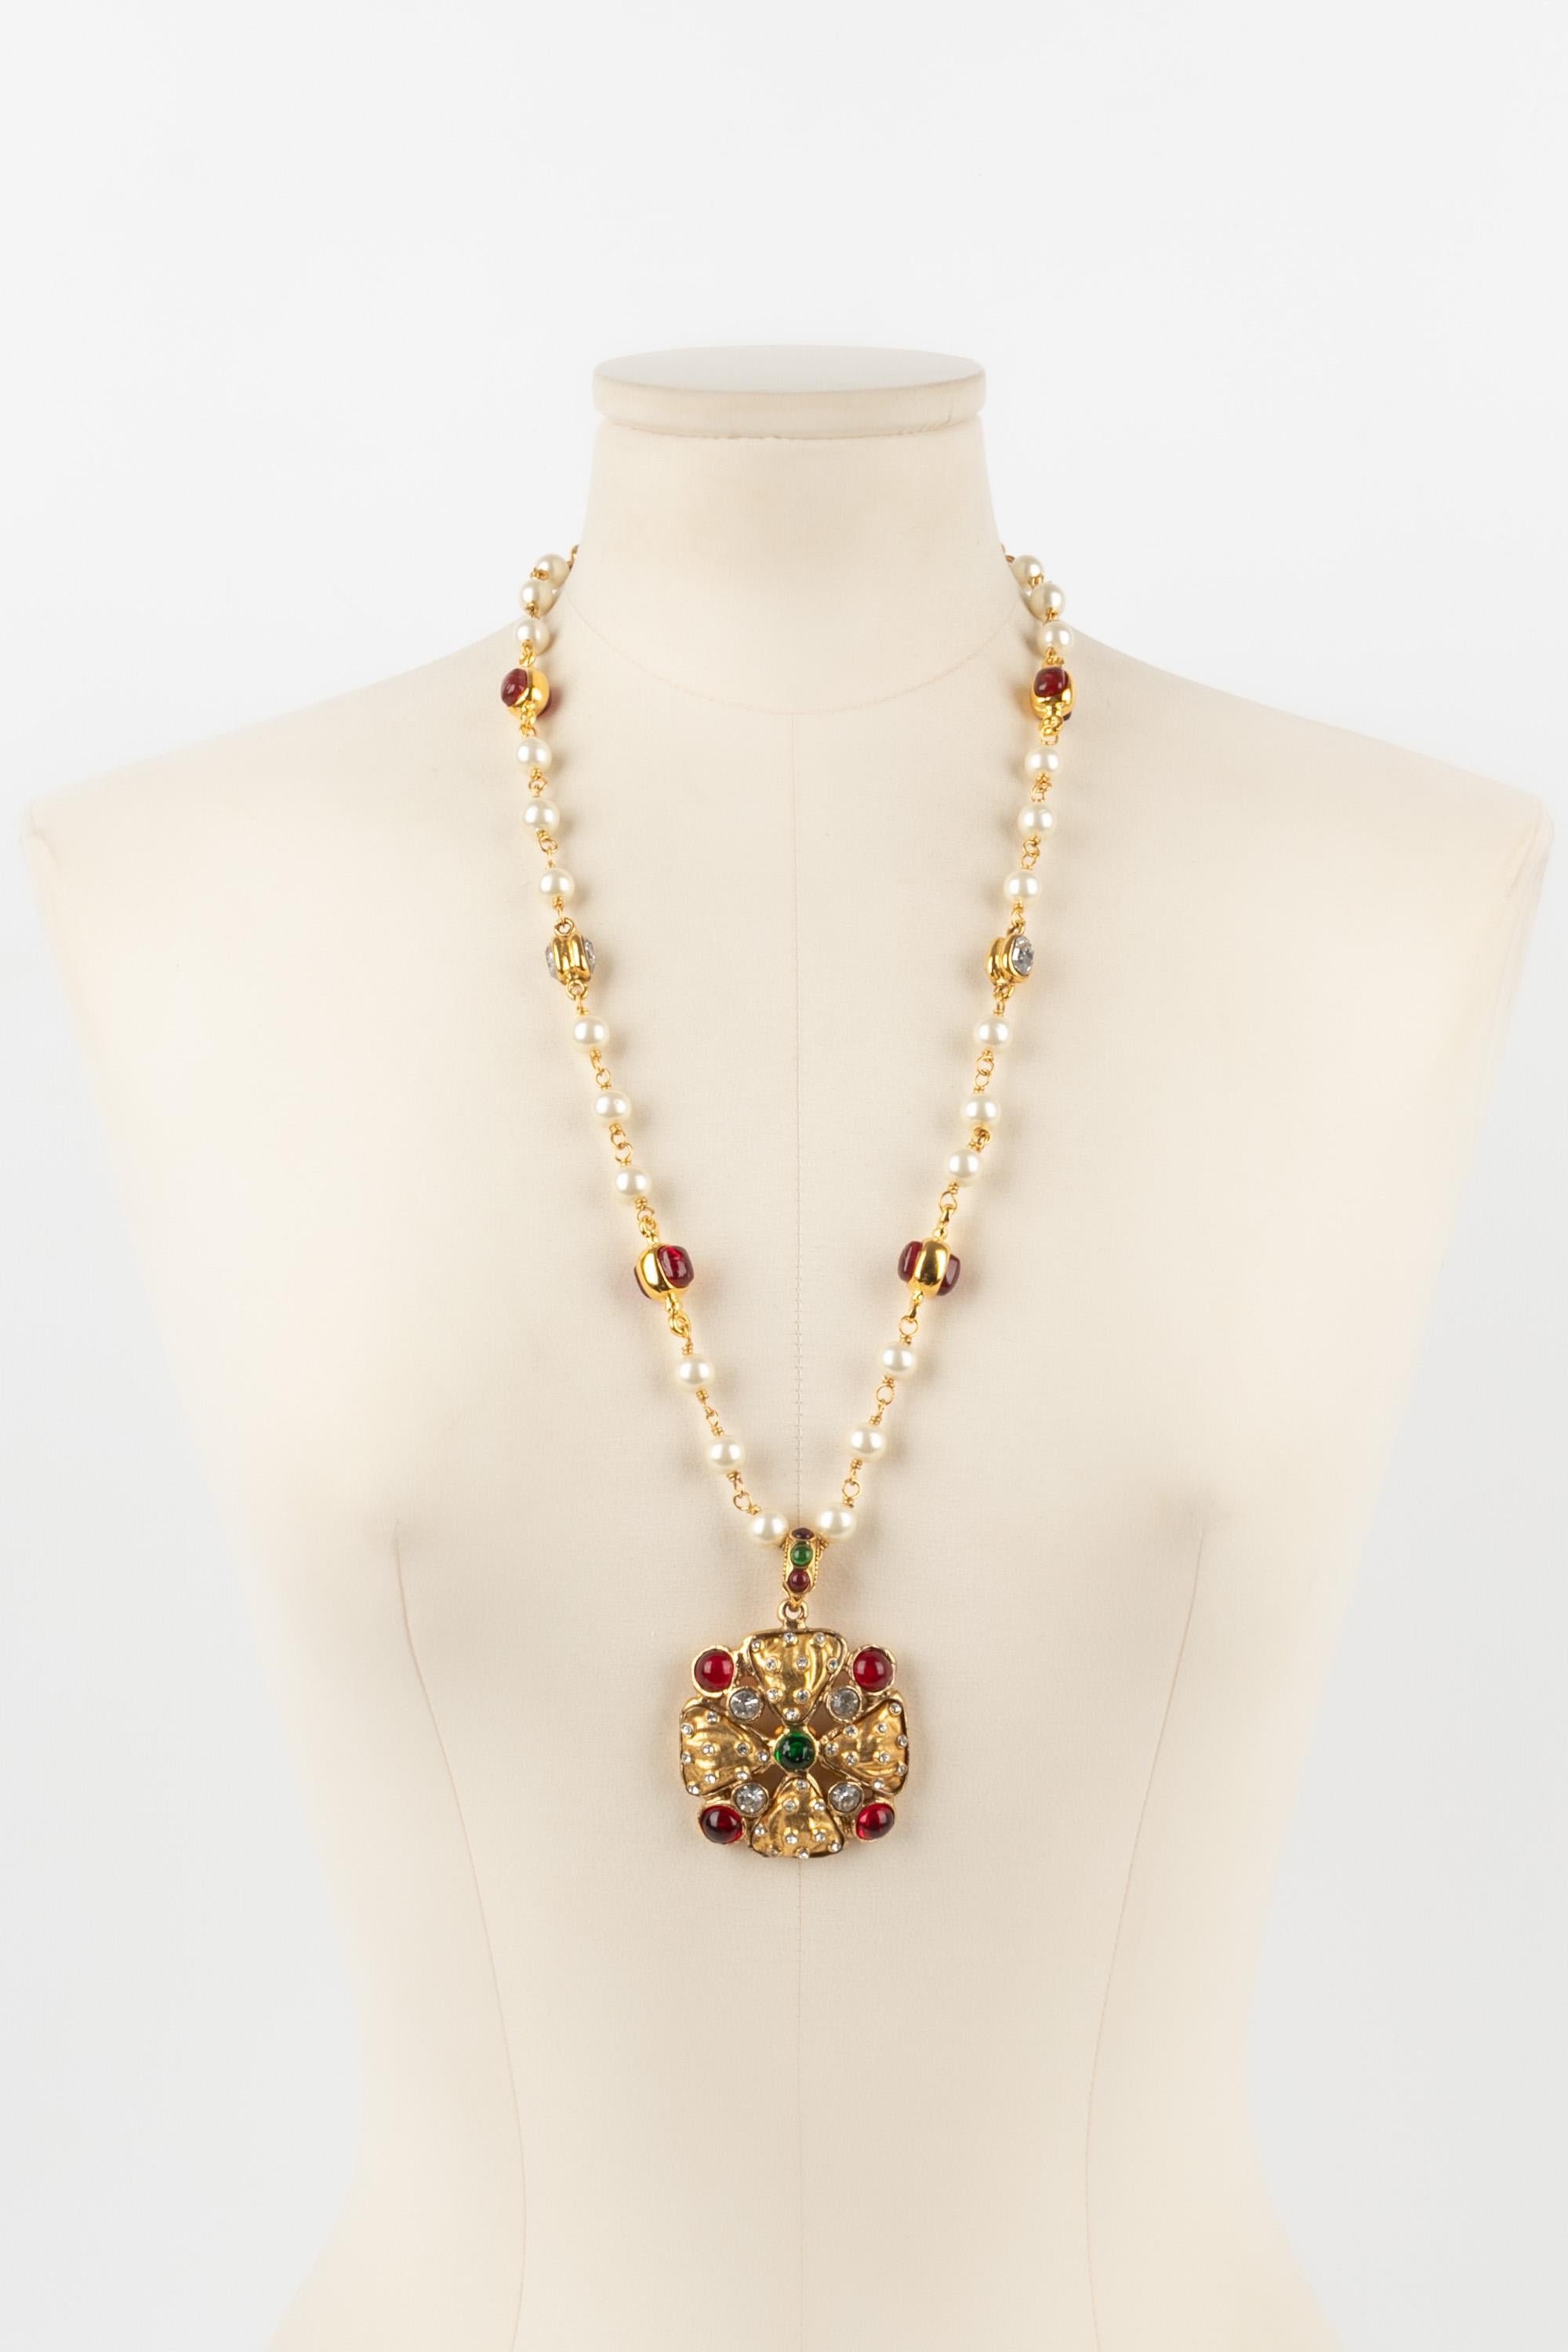 CHANEL - (Made in France) Byzantine-style golden metal necklace with glass paste and costume pearls.

Condition:
Very good condition

Dimensions:
Length: 70 cm

CB270